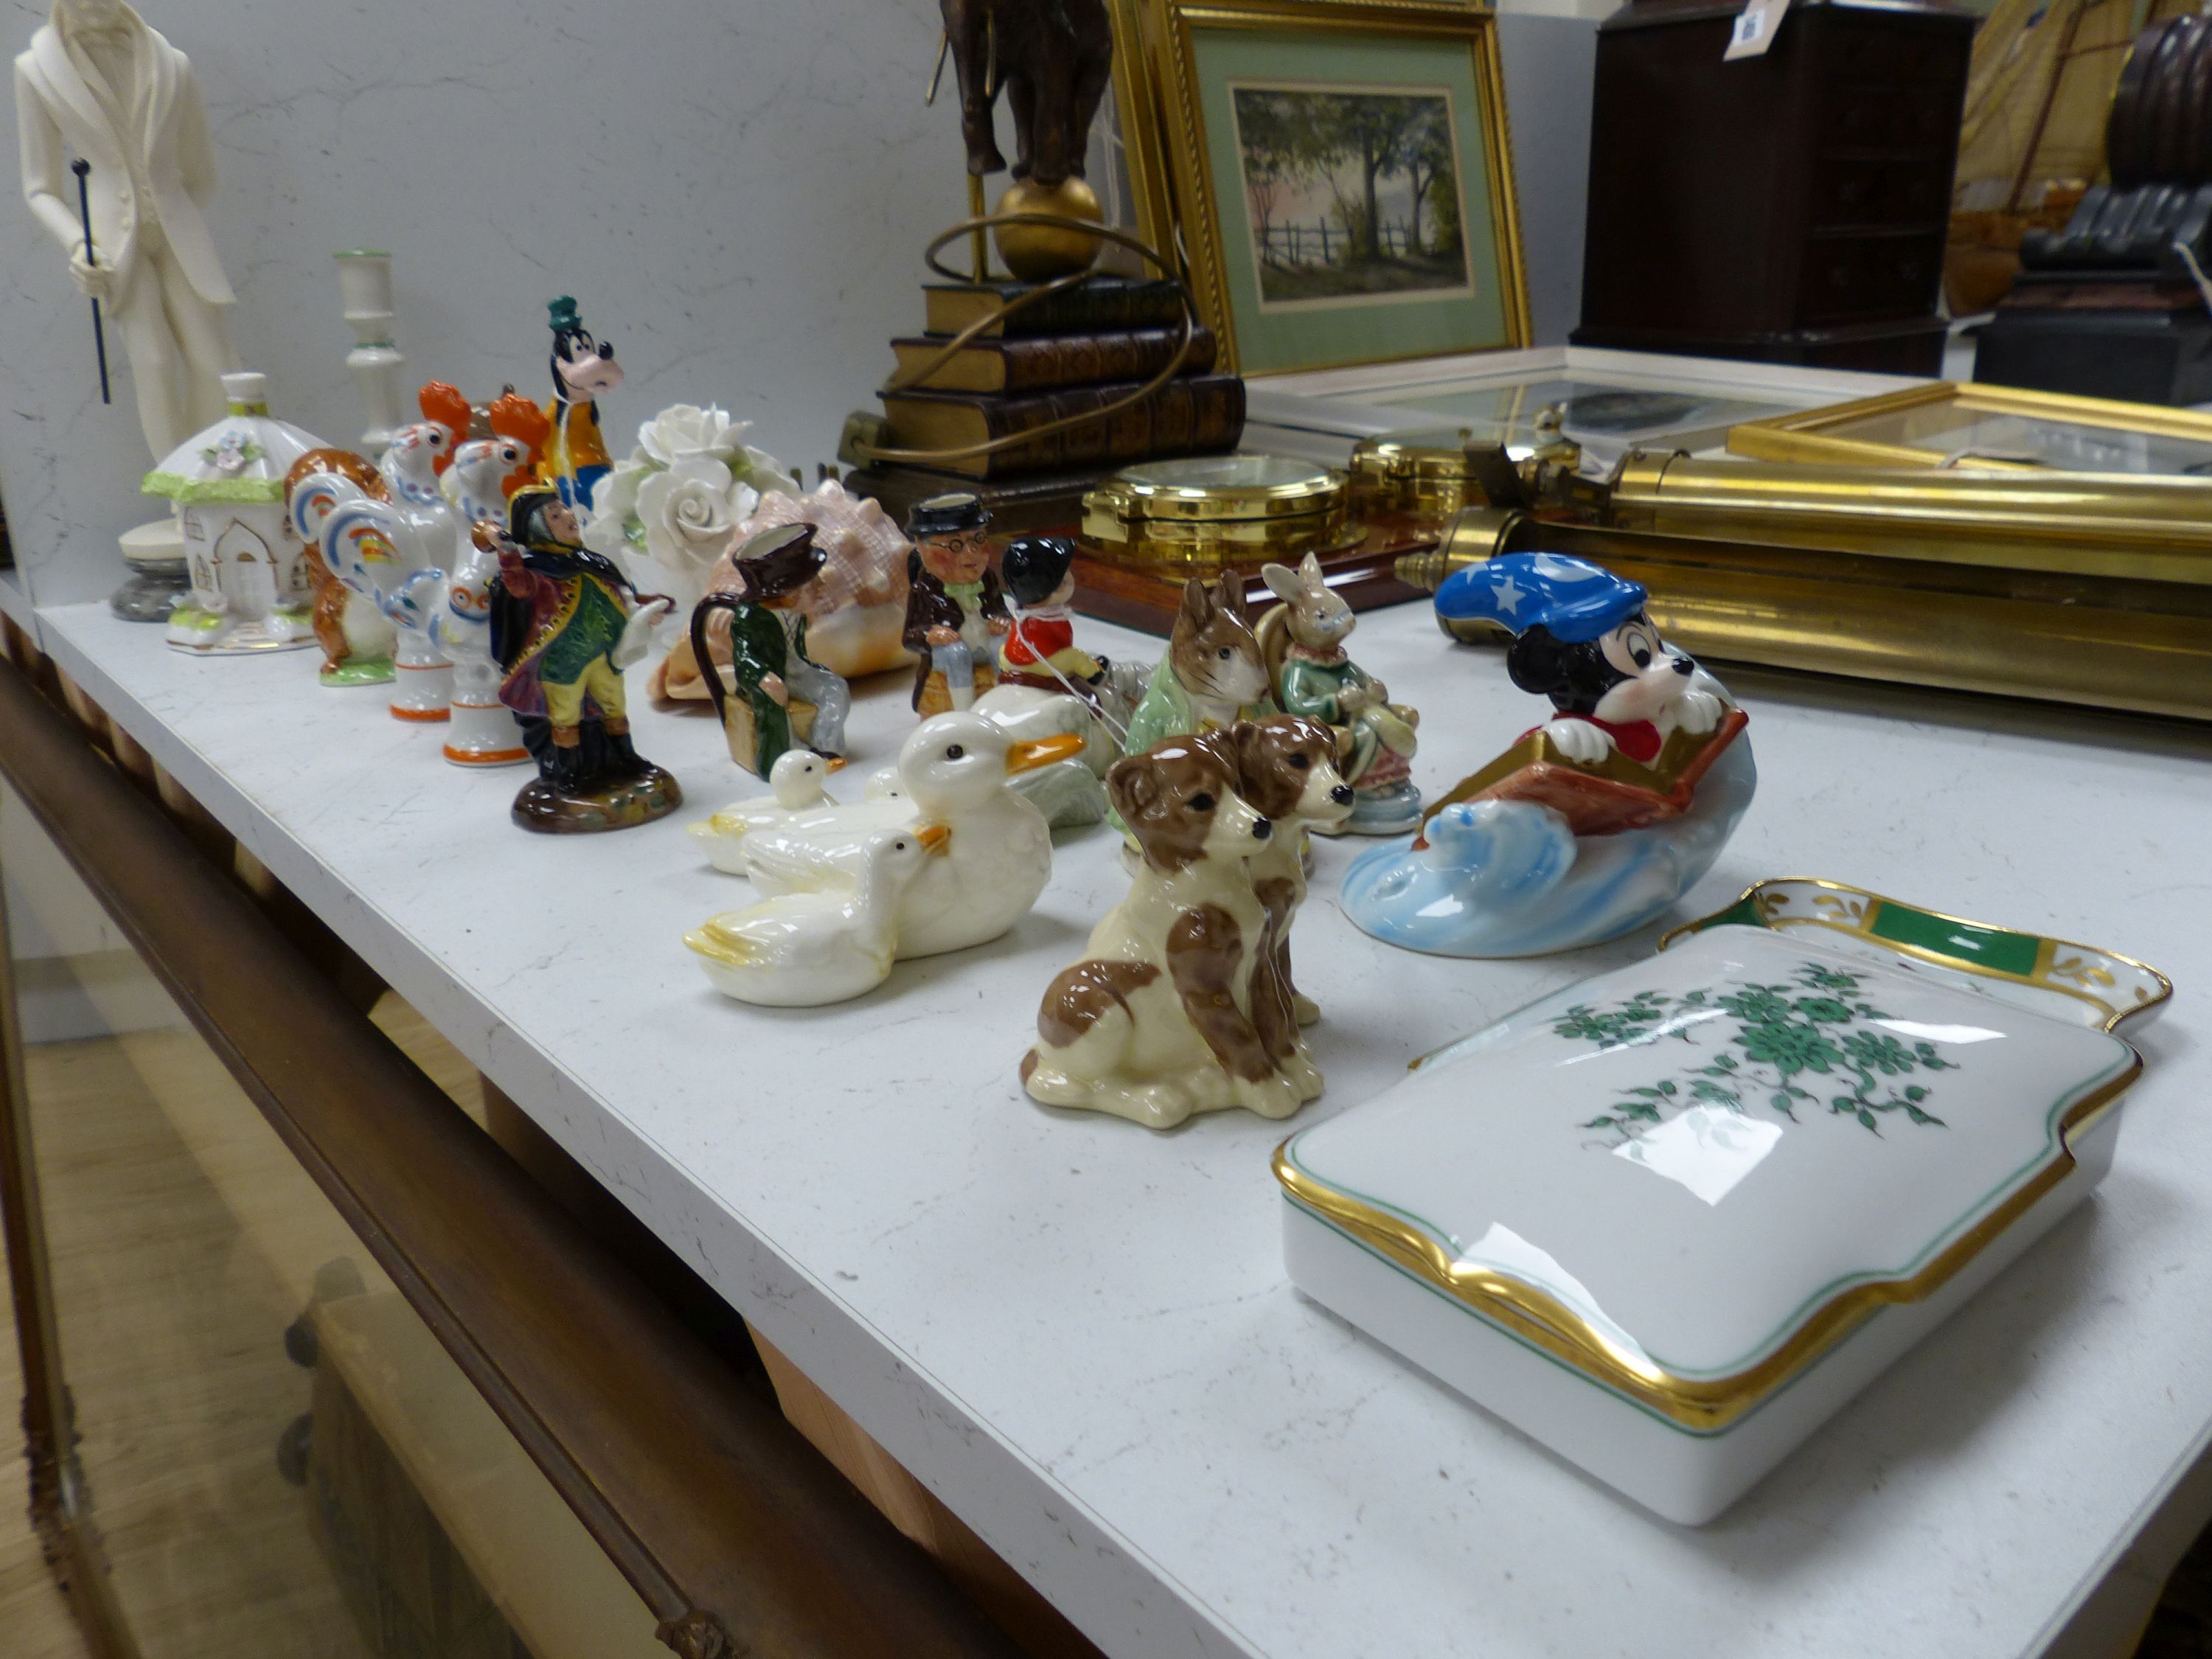 Two Beatrix Potter figures, Samuel Whiskers and Squirrel Nutkin, two Disney figures and sundry decorative items